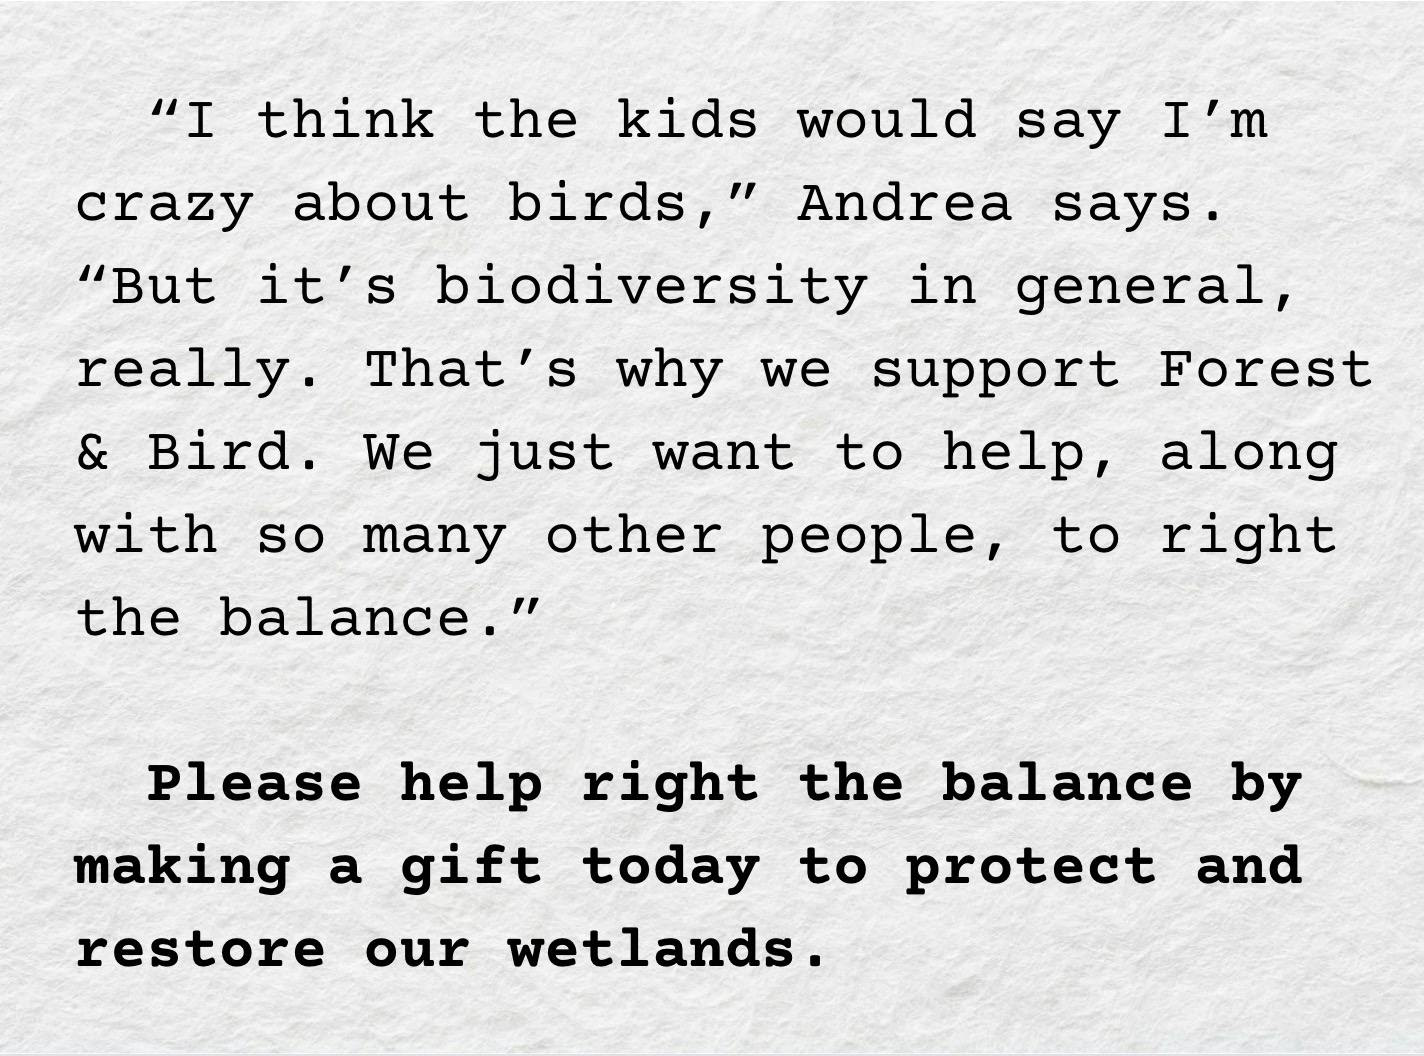 A screenshot showing the text: "“I think the kids would say I’m crazy about birds,” Andrea says. “But it’s biodiversity in general, really. That’s why we support Forest & Bird. We just want to help, along with so many other people, to right the balance.”    Please help right the balance by making a gift today to protect and restore our wetlands."